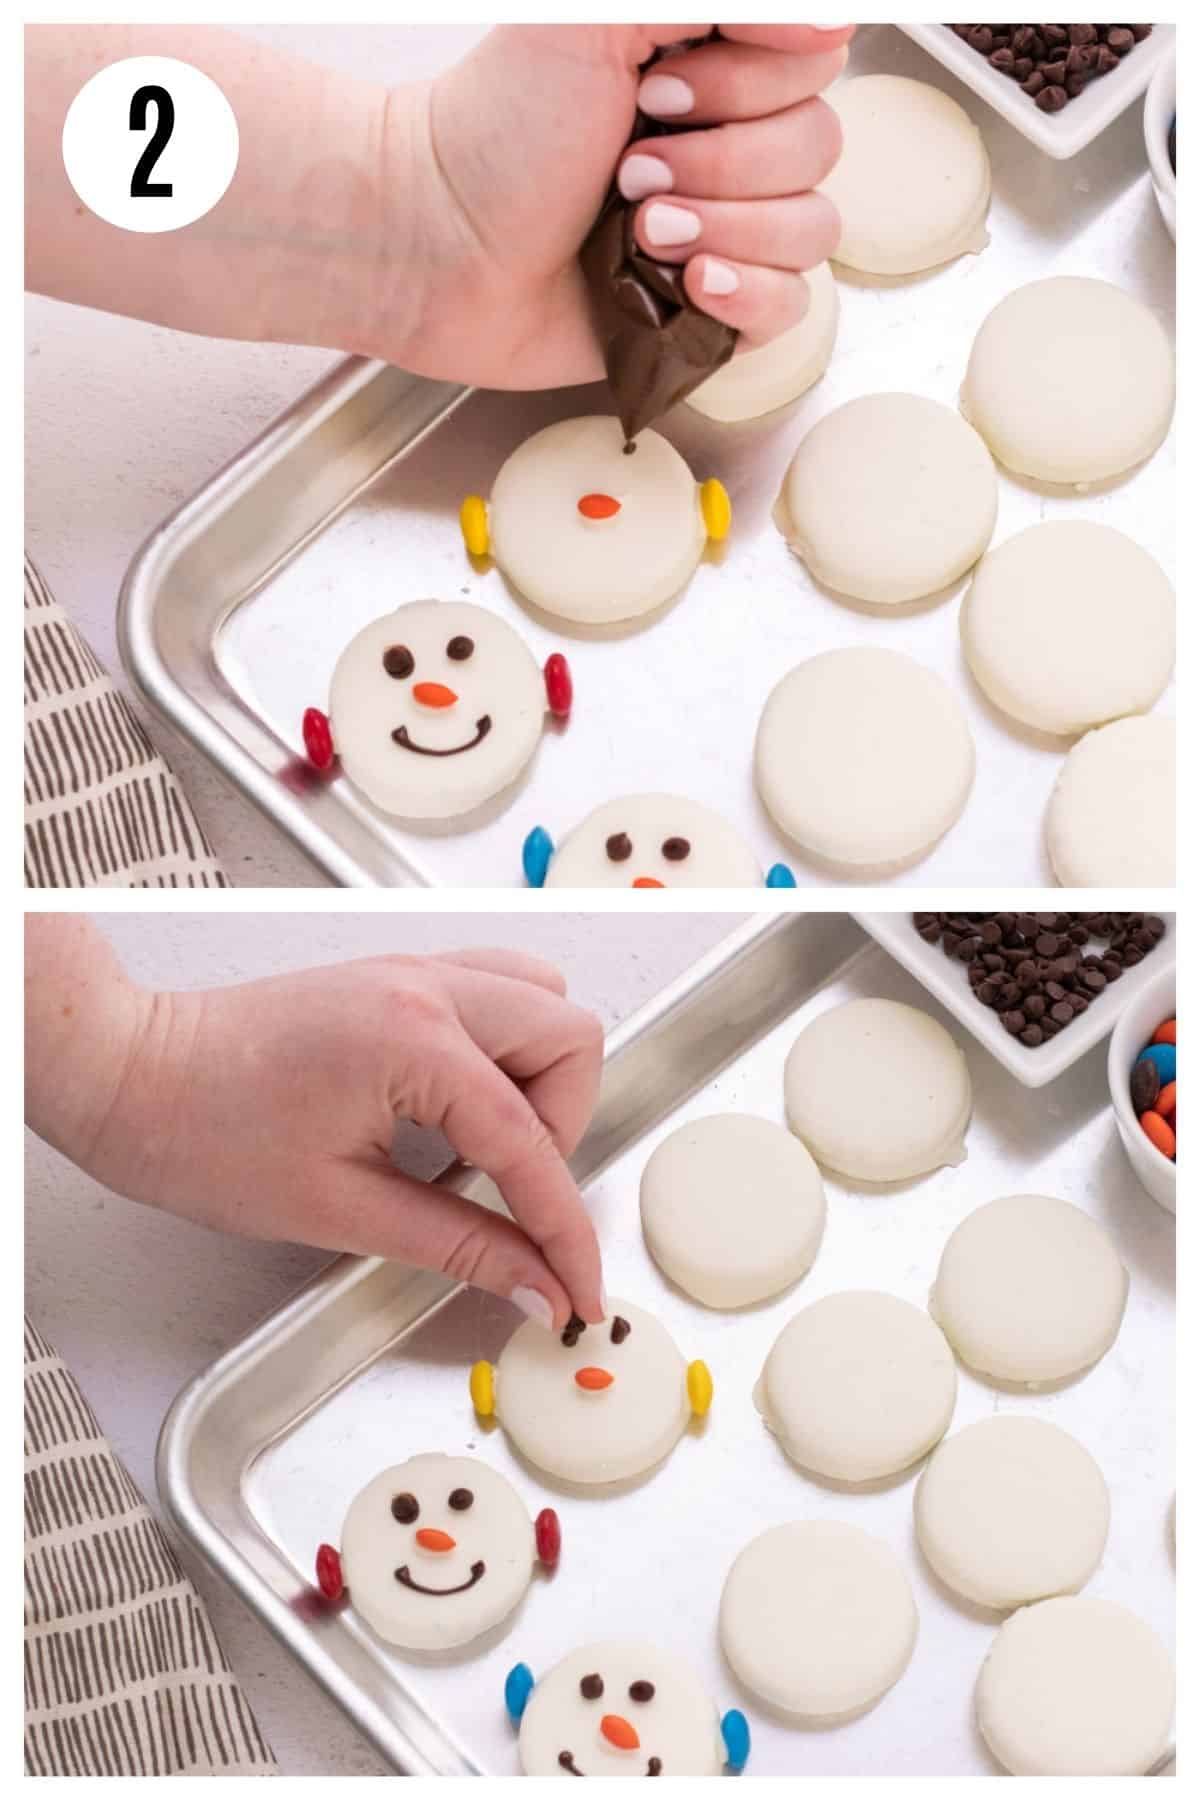 Hands squeezing melted milk chocolate onto white chocolate covered Oreo cookie and then mini chocolate chips being added to make eyes for snowman face. 